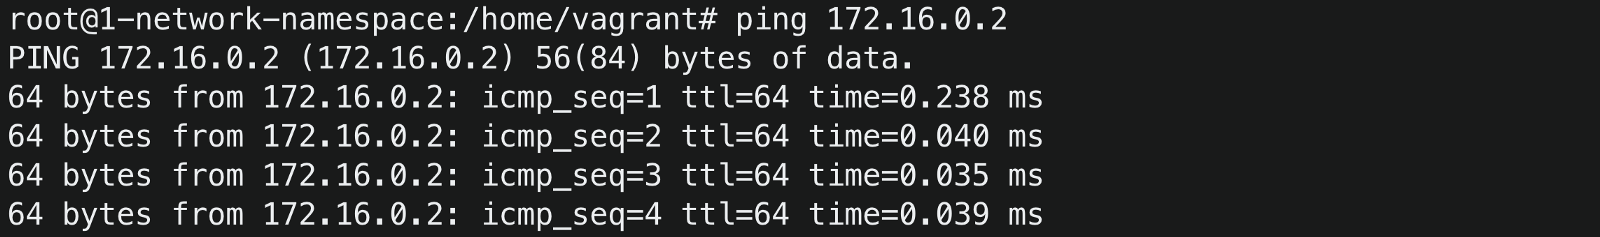 ping-container-success